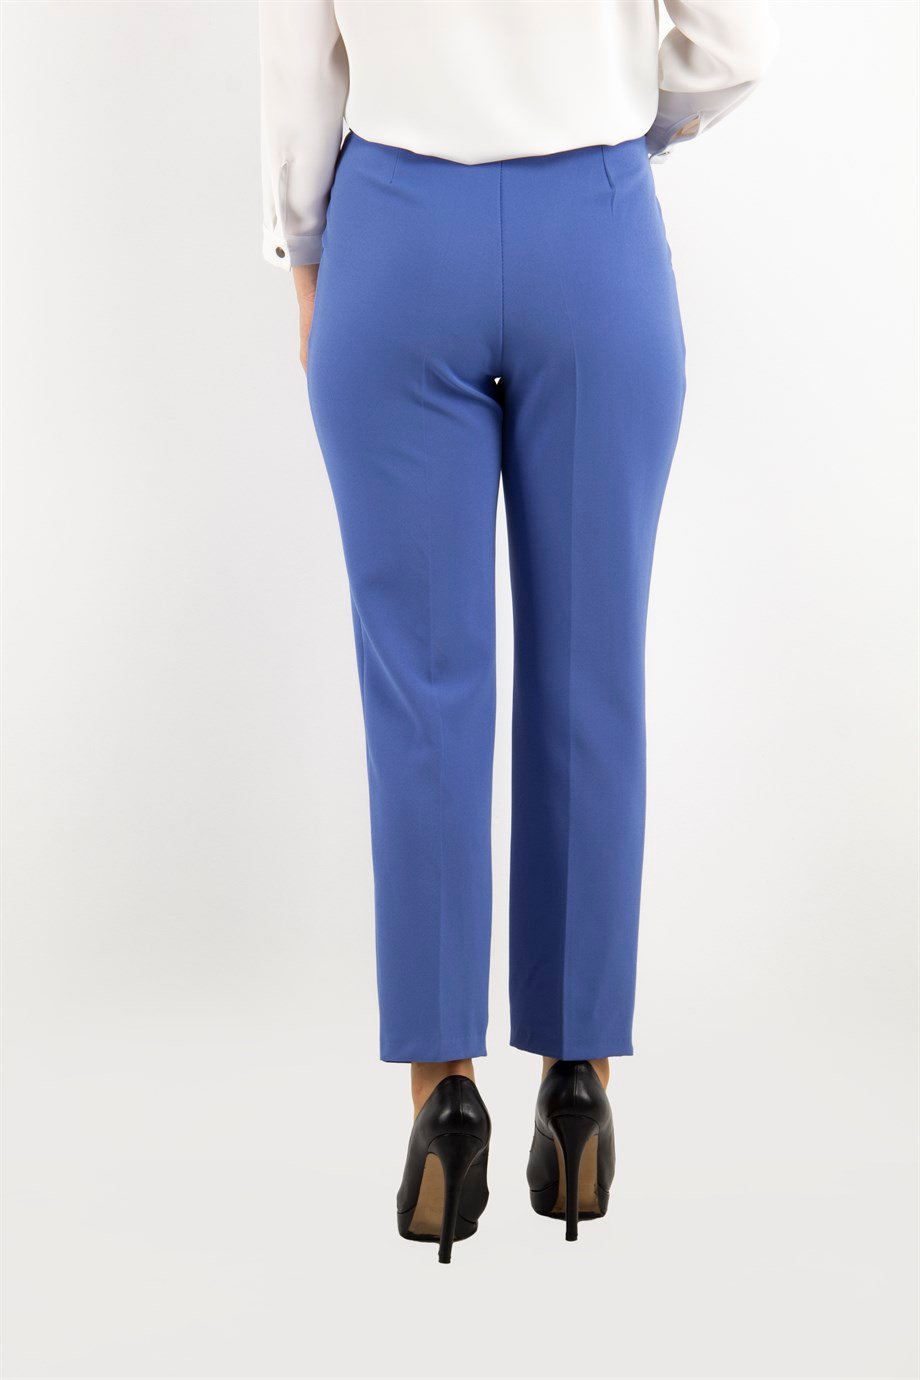 Trousers With Matching Belt Casual Formal Office Pants For Ladies - Indigo  - Wholesale Womens Clothing Vendors For Boutiques